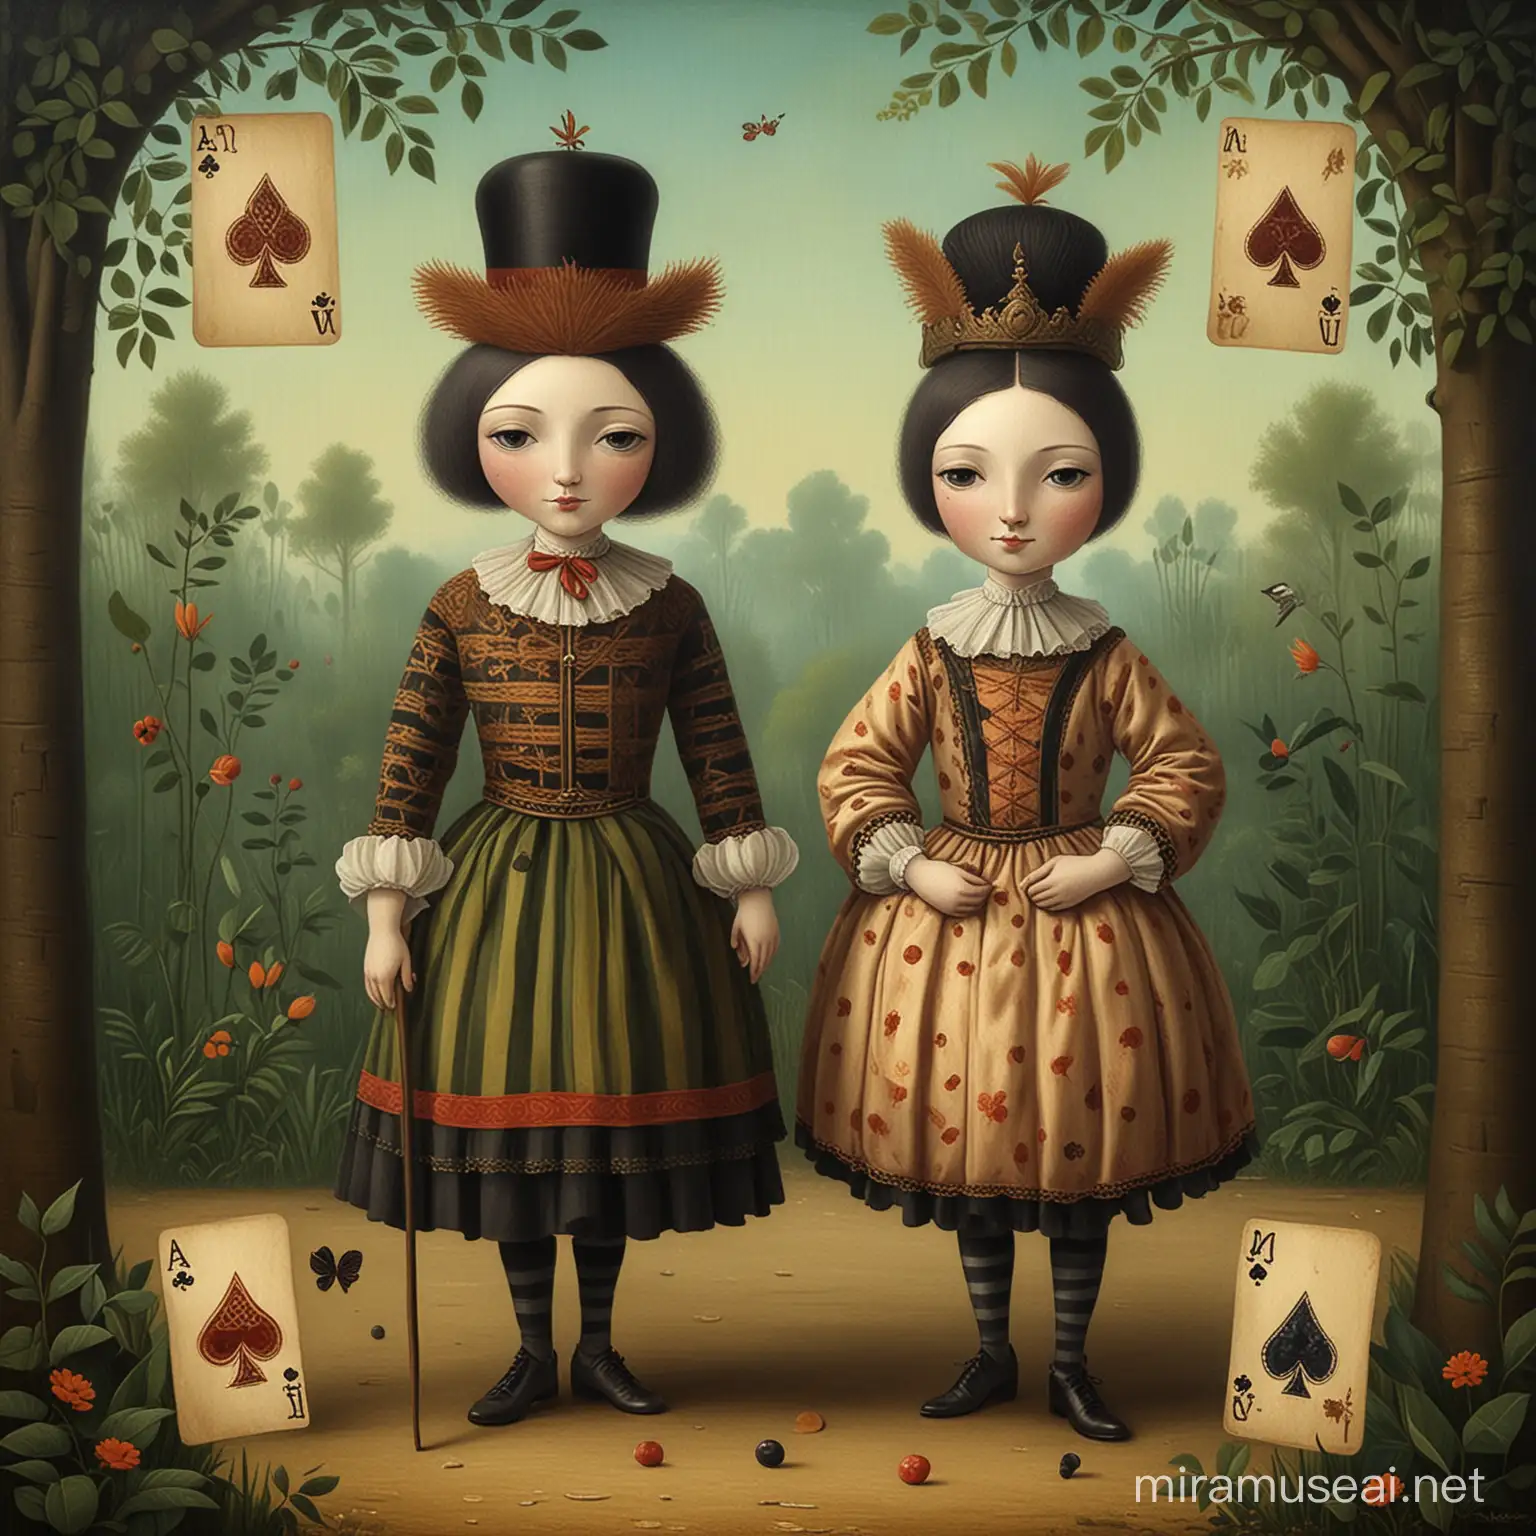 Renaissance Costumed Card Figures in a Surrealistic Painterly Wall Art